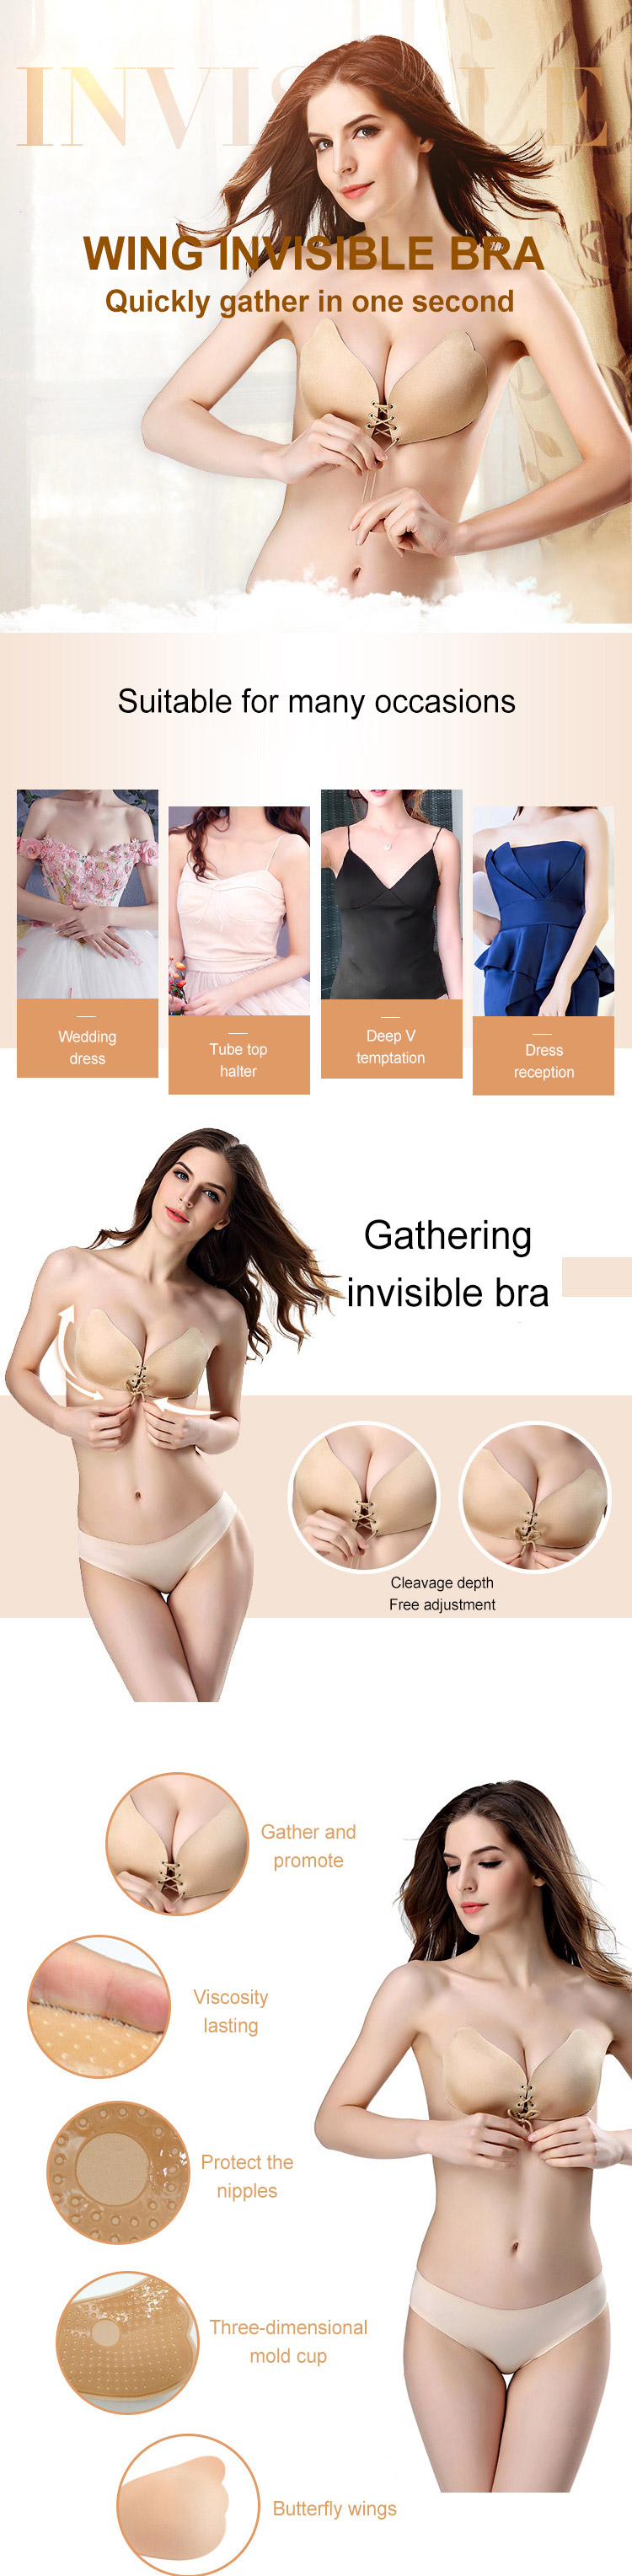 silicone backless bra, lift it up adhesive silicone bra